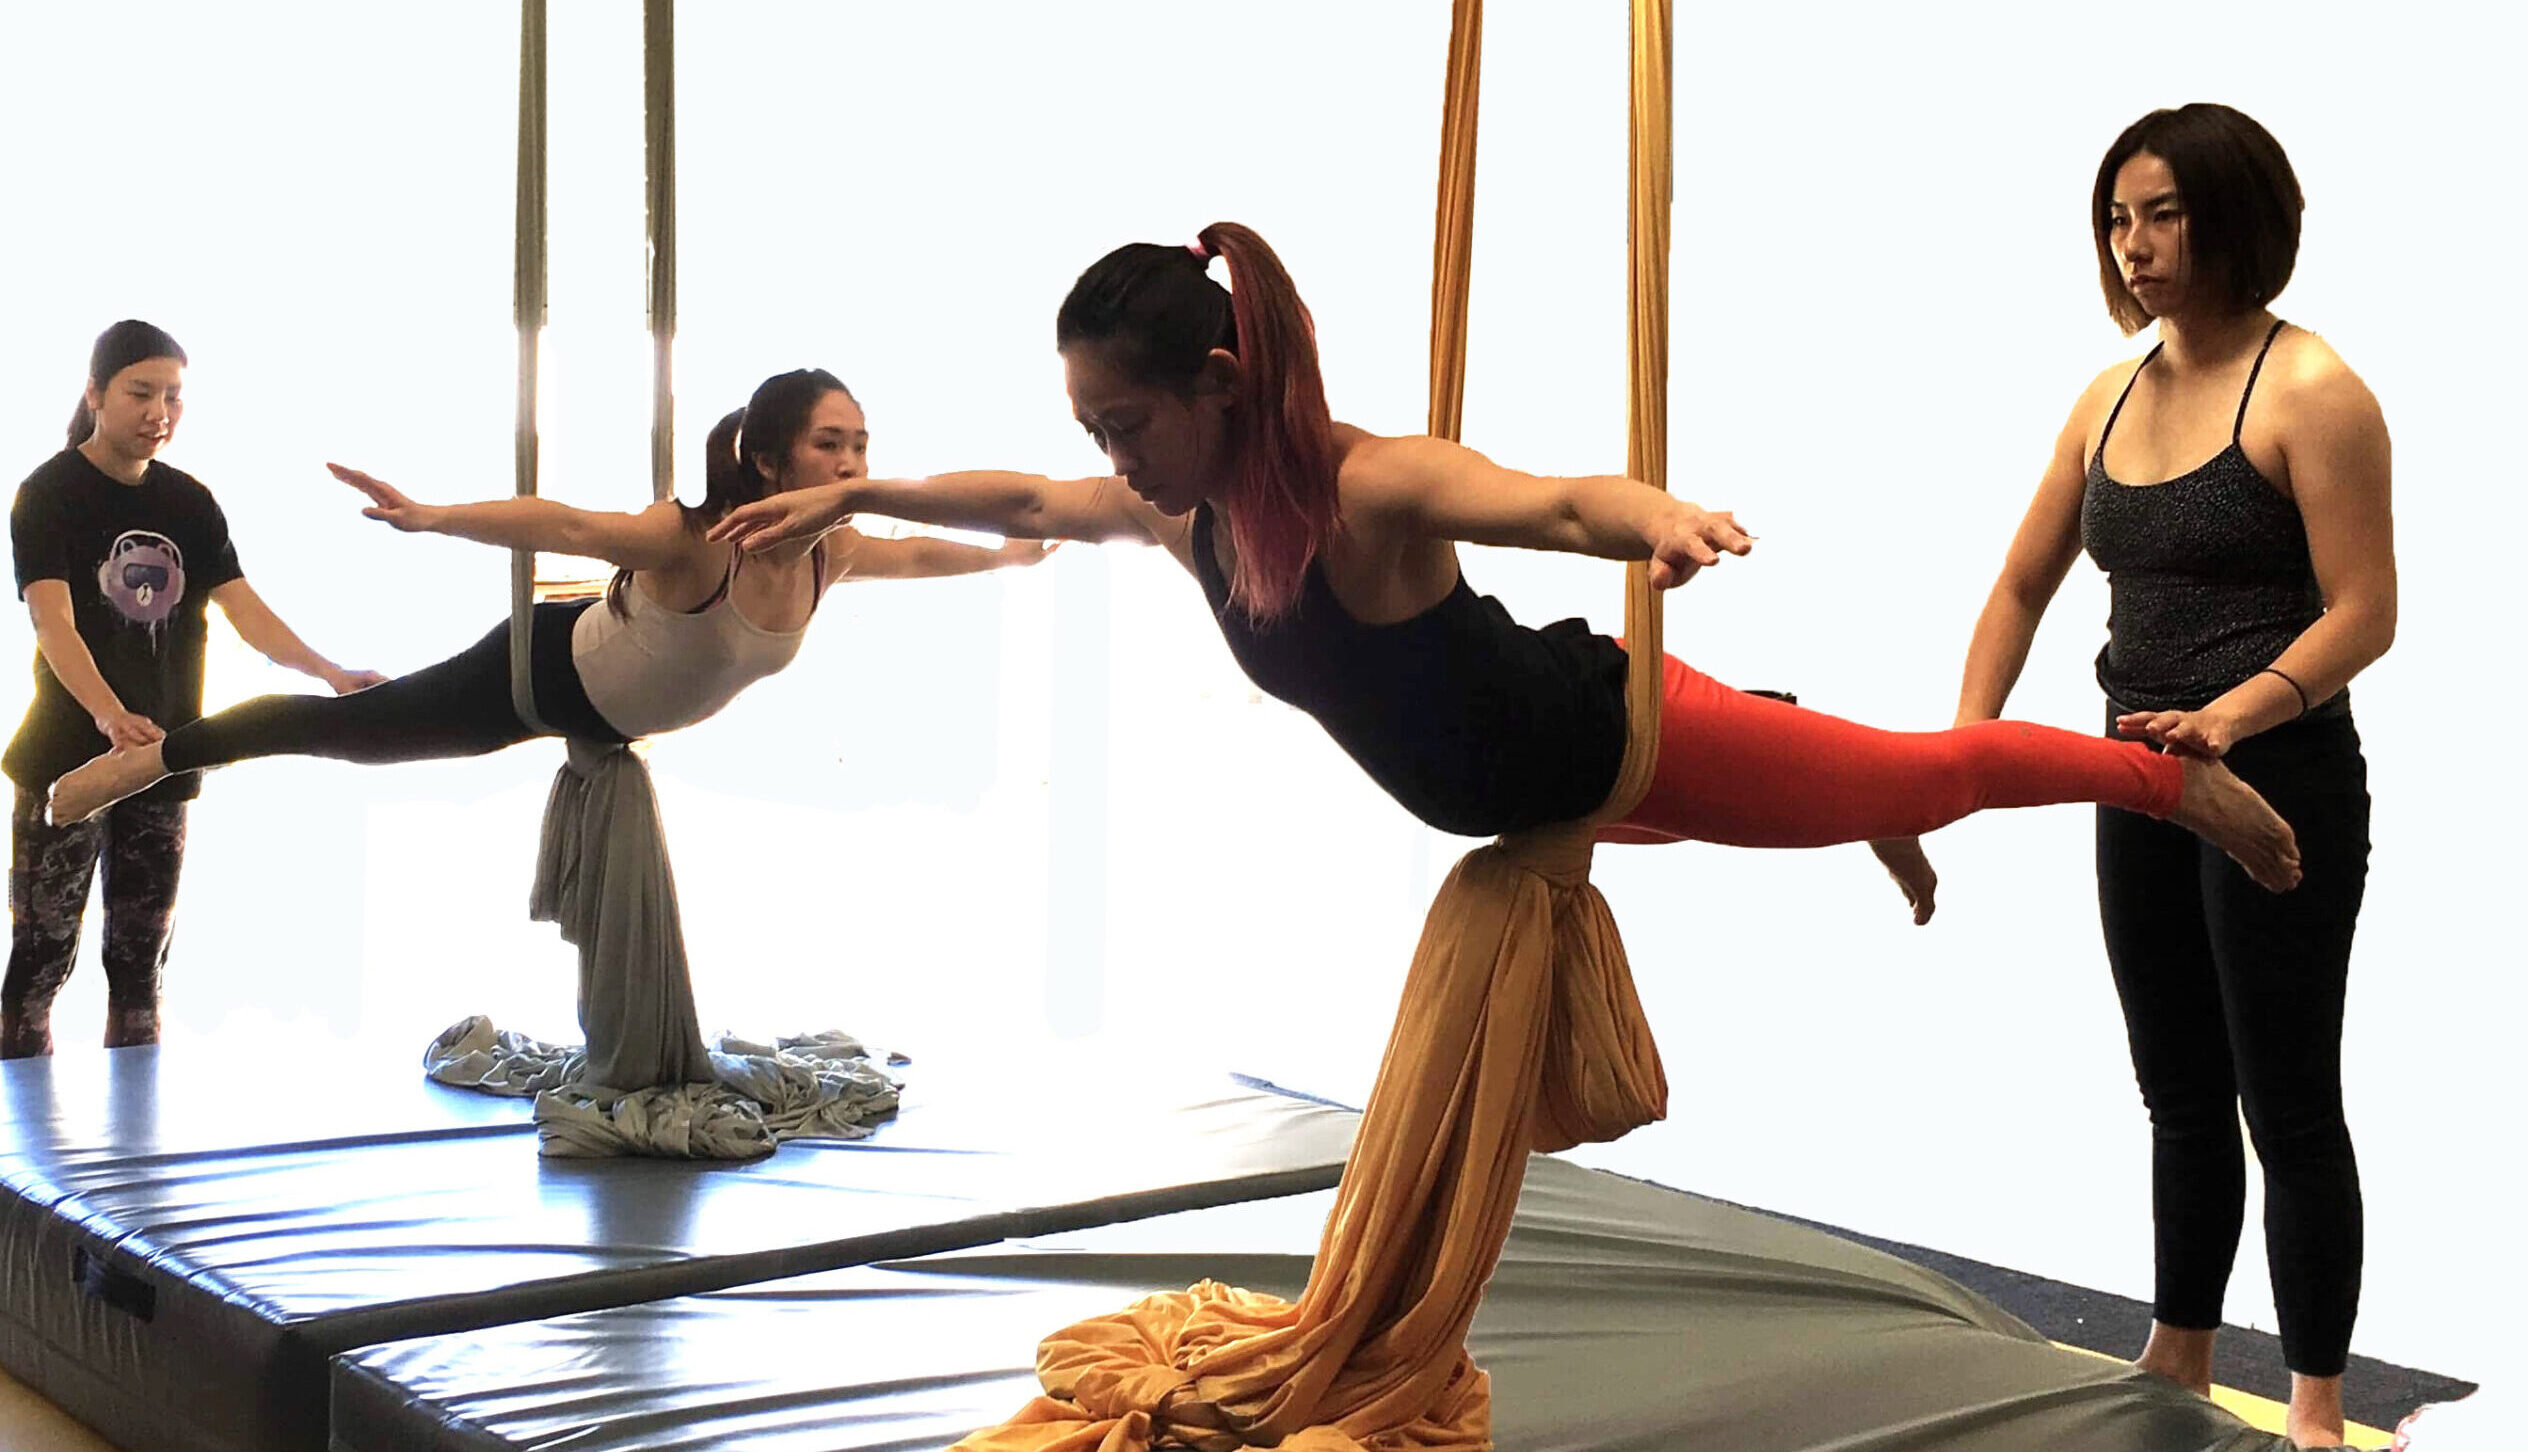 Aerial Yoga With Alison | Ready to HANG UP SIDE DOWN ? ... Joya Instructor  @Alison Cardenas De-Mystifies Aerial Yoga and takes us through what it's  like with a few Postures on